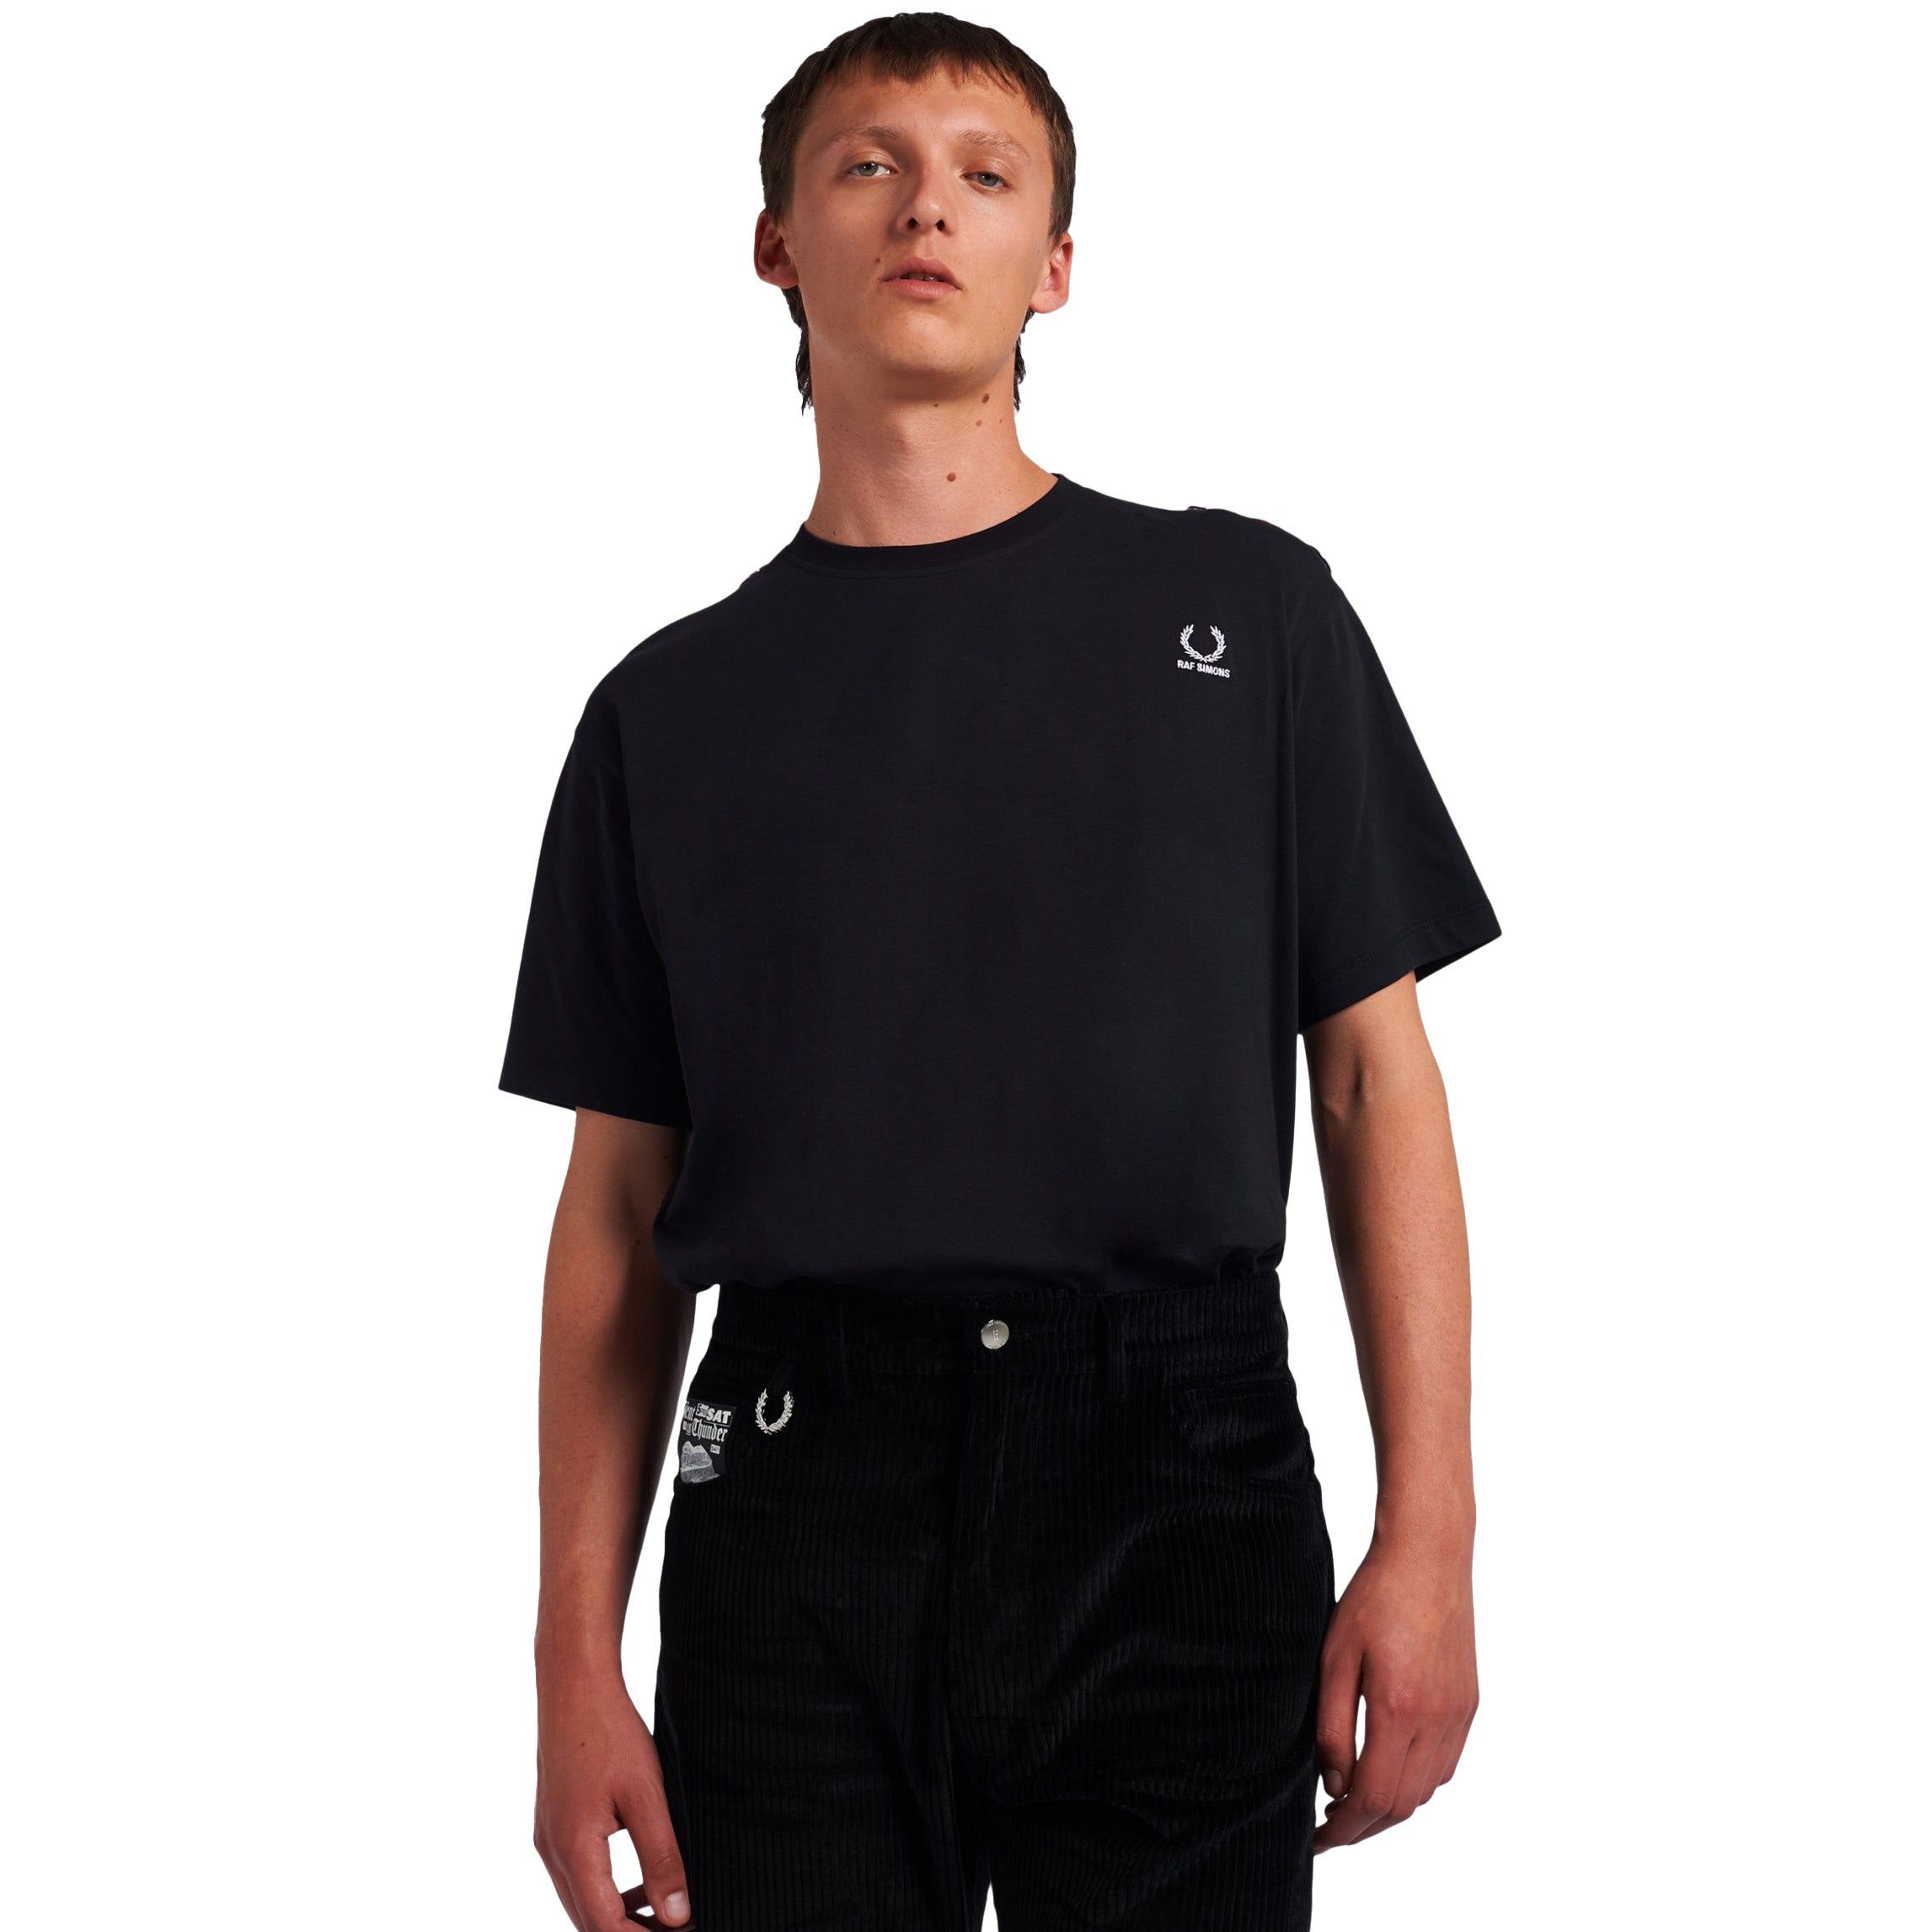 Fred Perry x Raf Simons Oversized Shoulder Detail T-Shirt Black